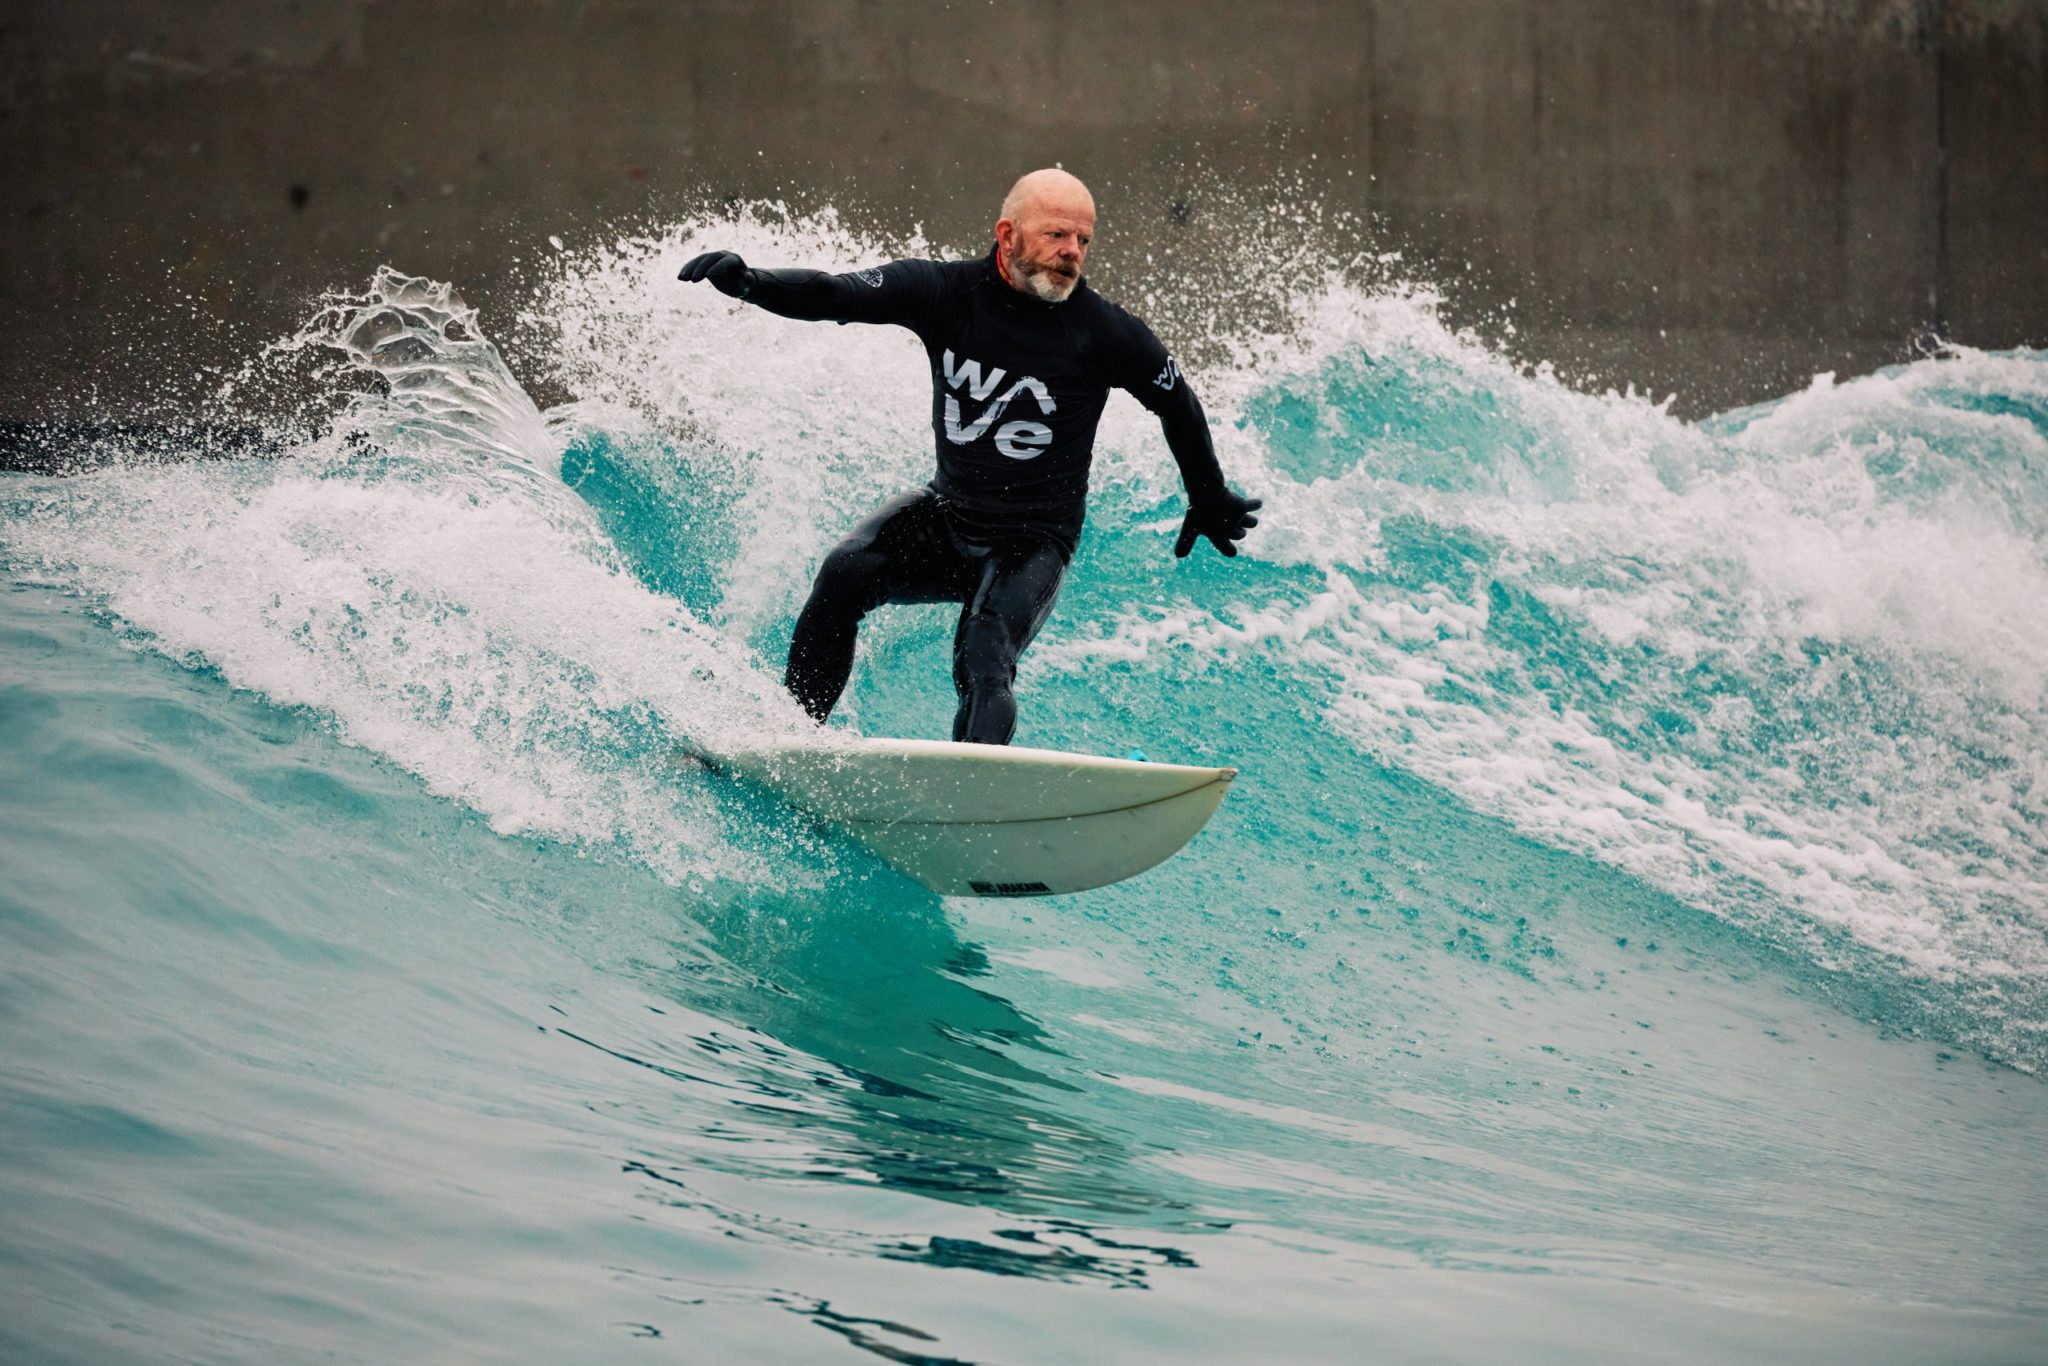 Surfer turning waves during winter at The Wave, surfing inland lake in Bristol